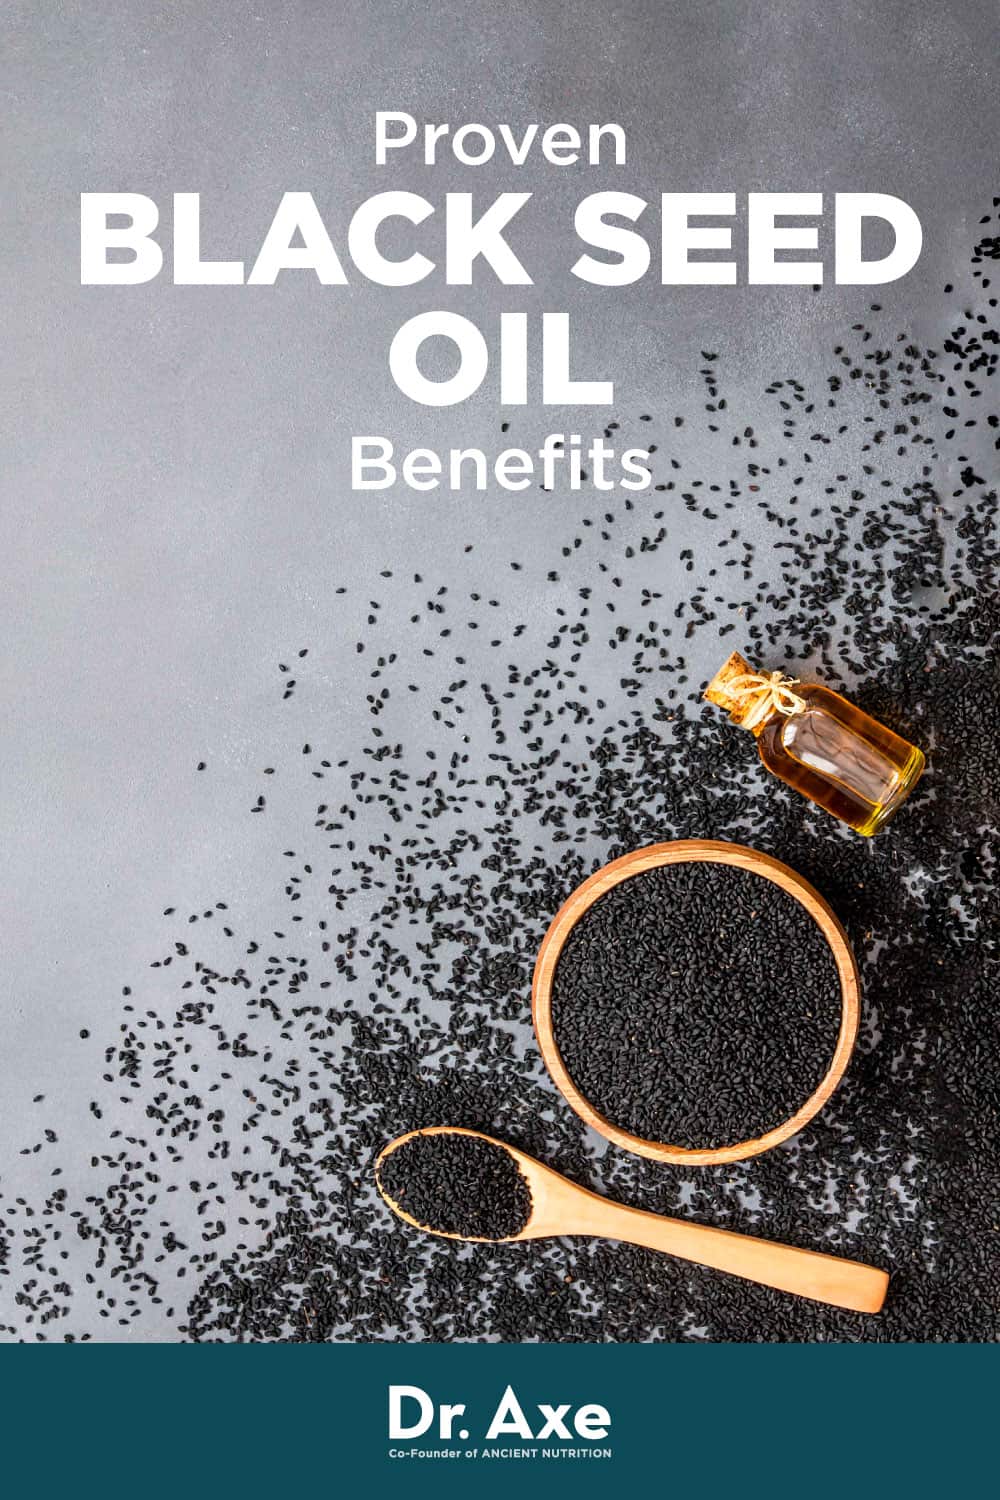 Black Seed Oil Benefits, Uses and Possible Side Effects - Dr. Axe